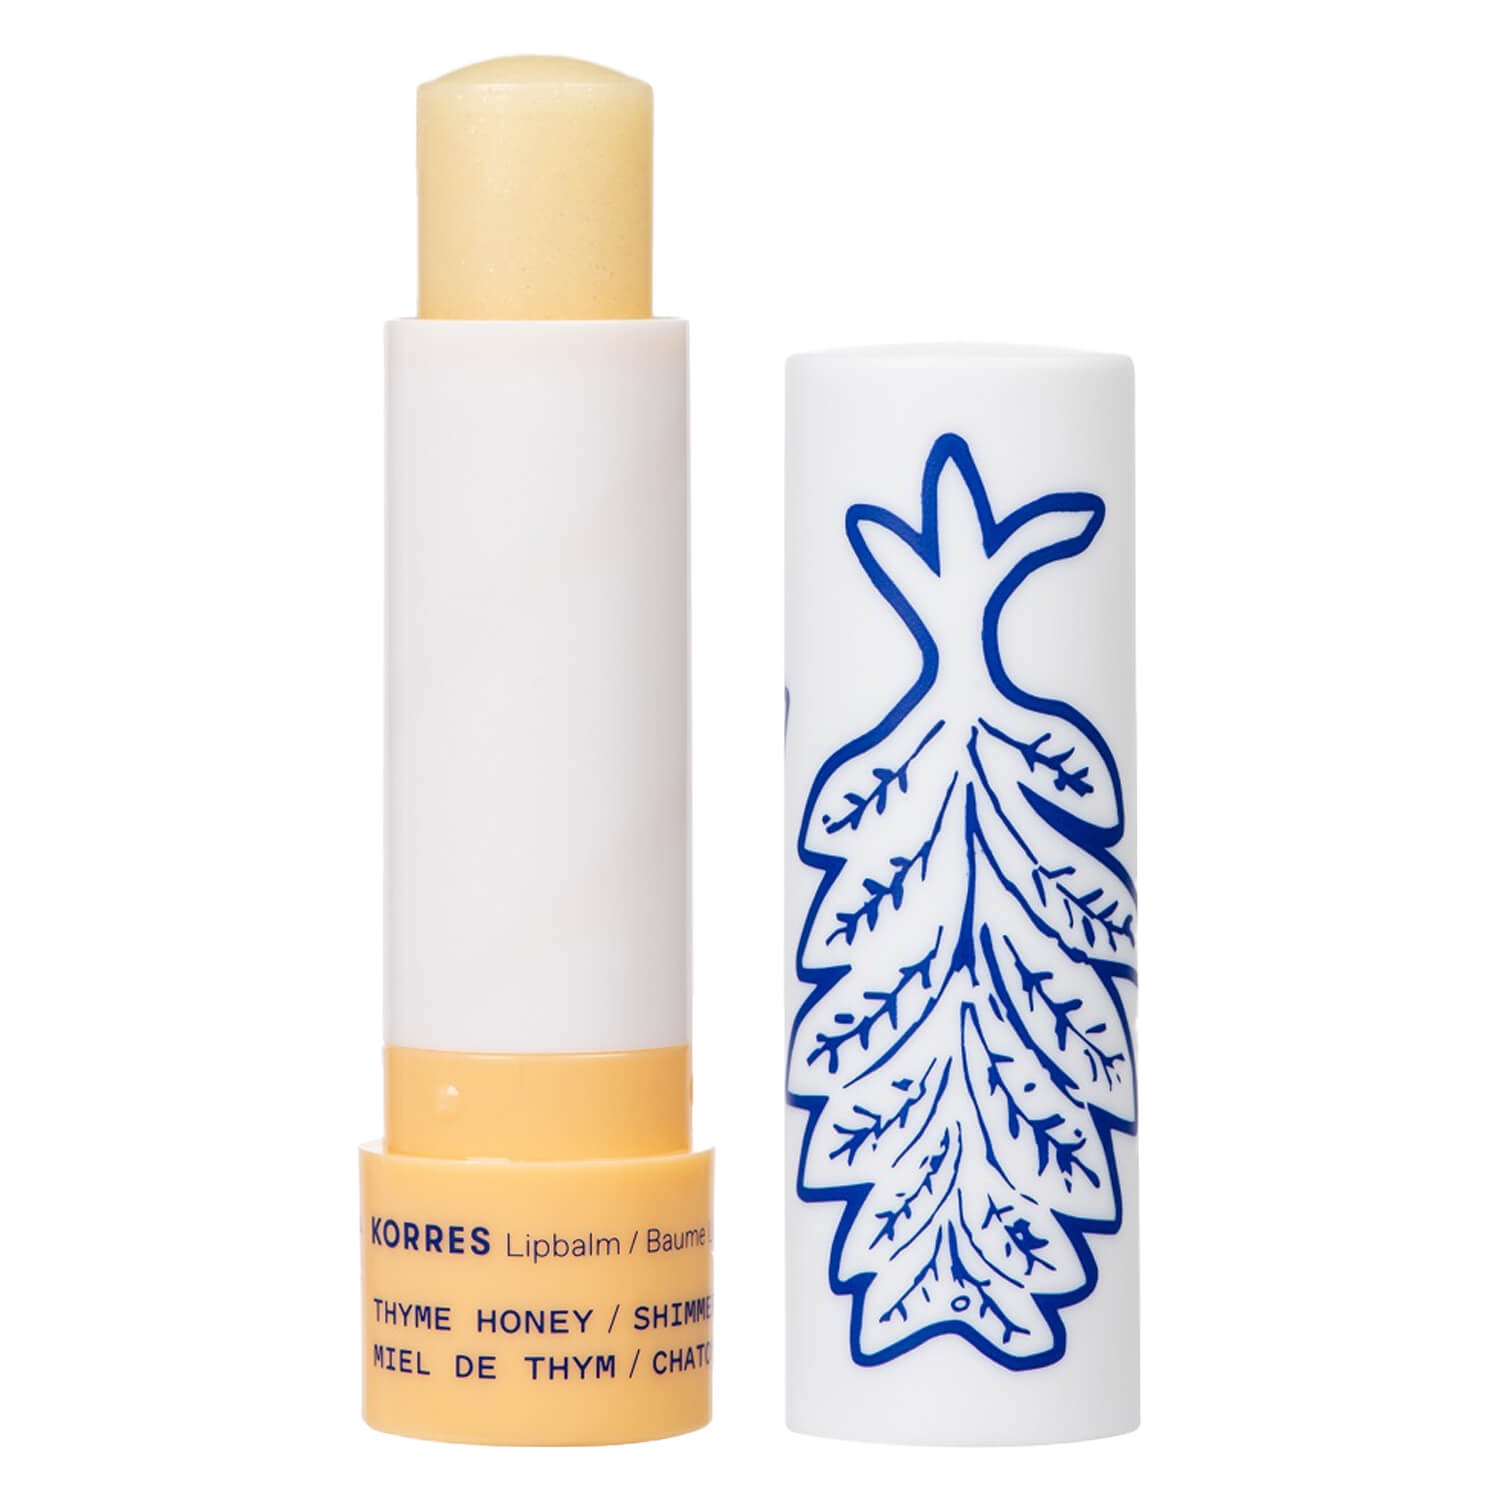 Product image from Korres Care - Thyme Honey Lip Balm Shimmery